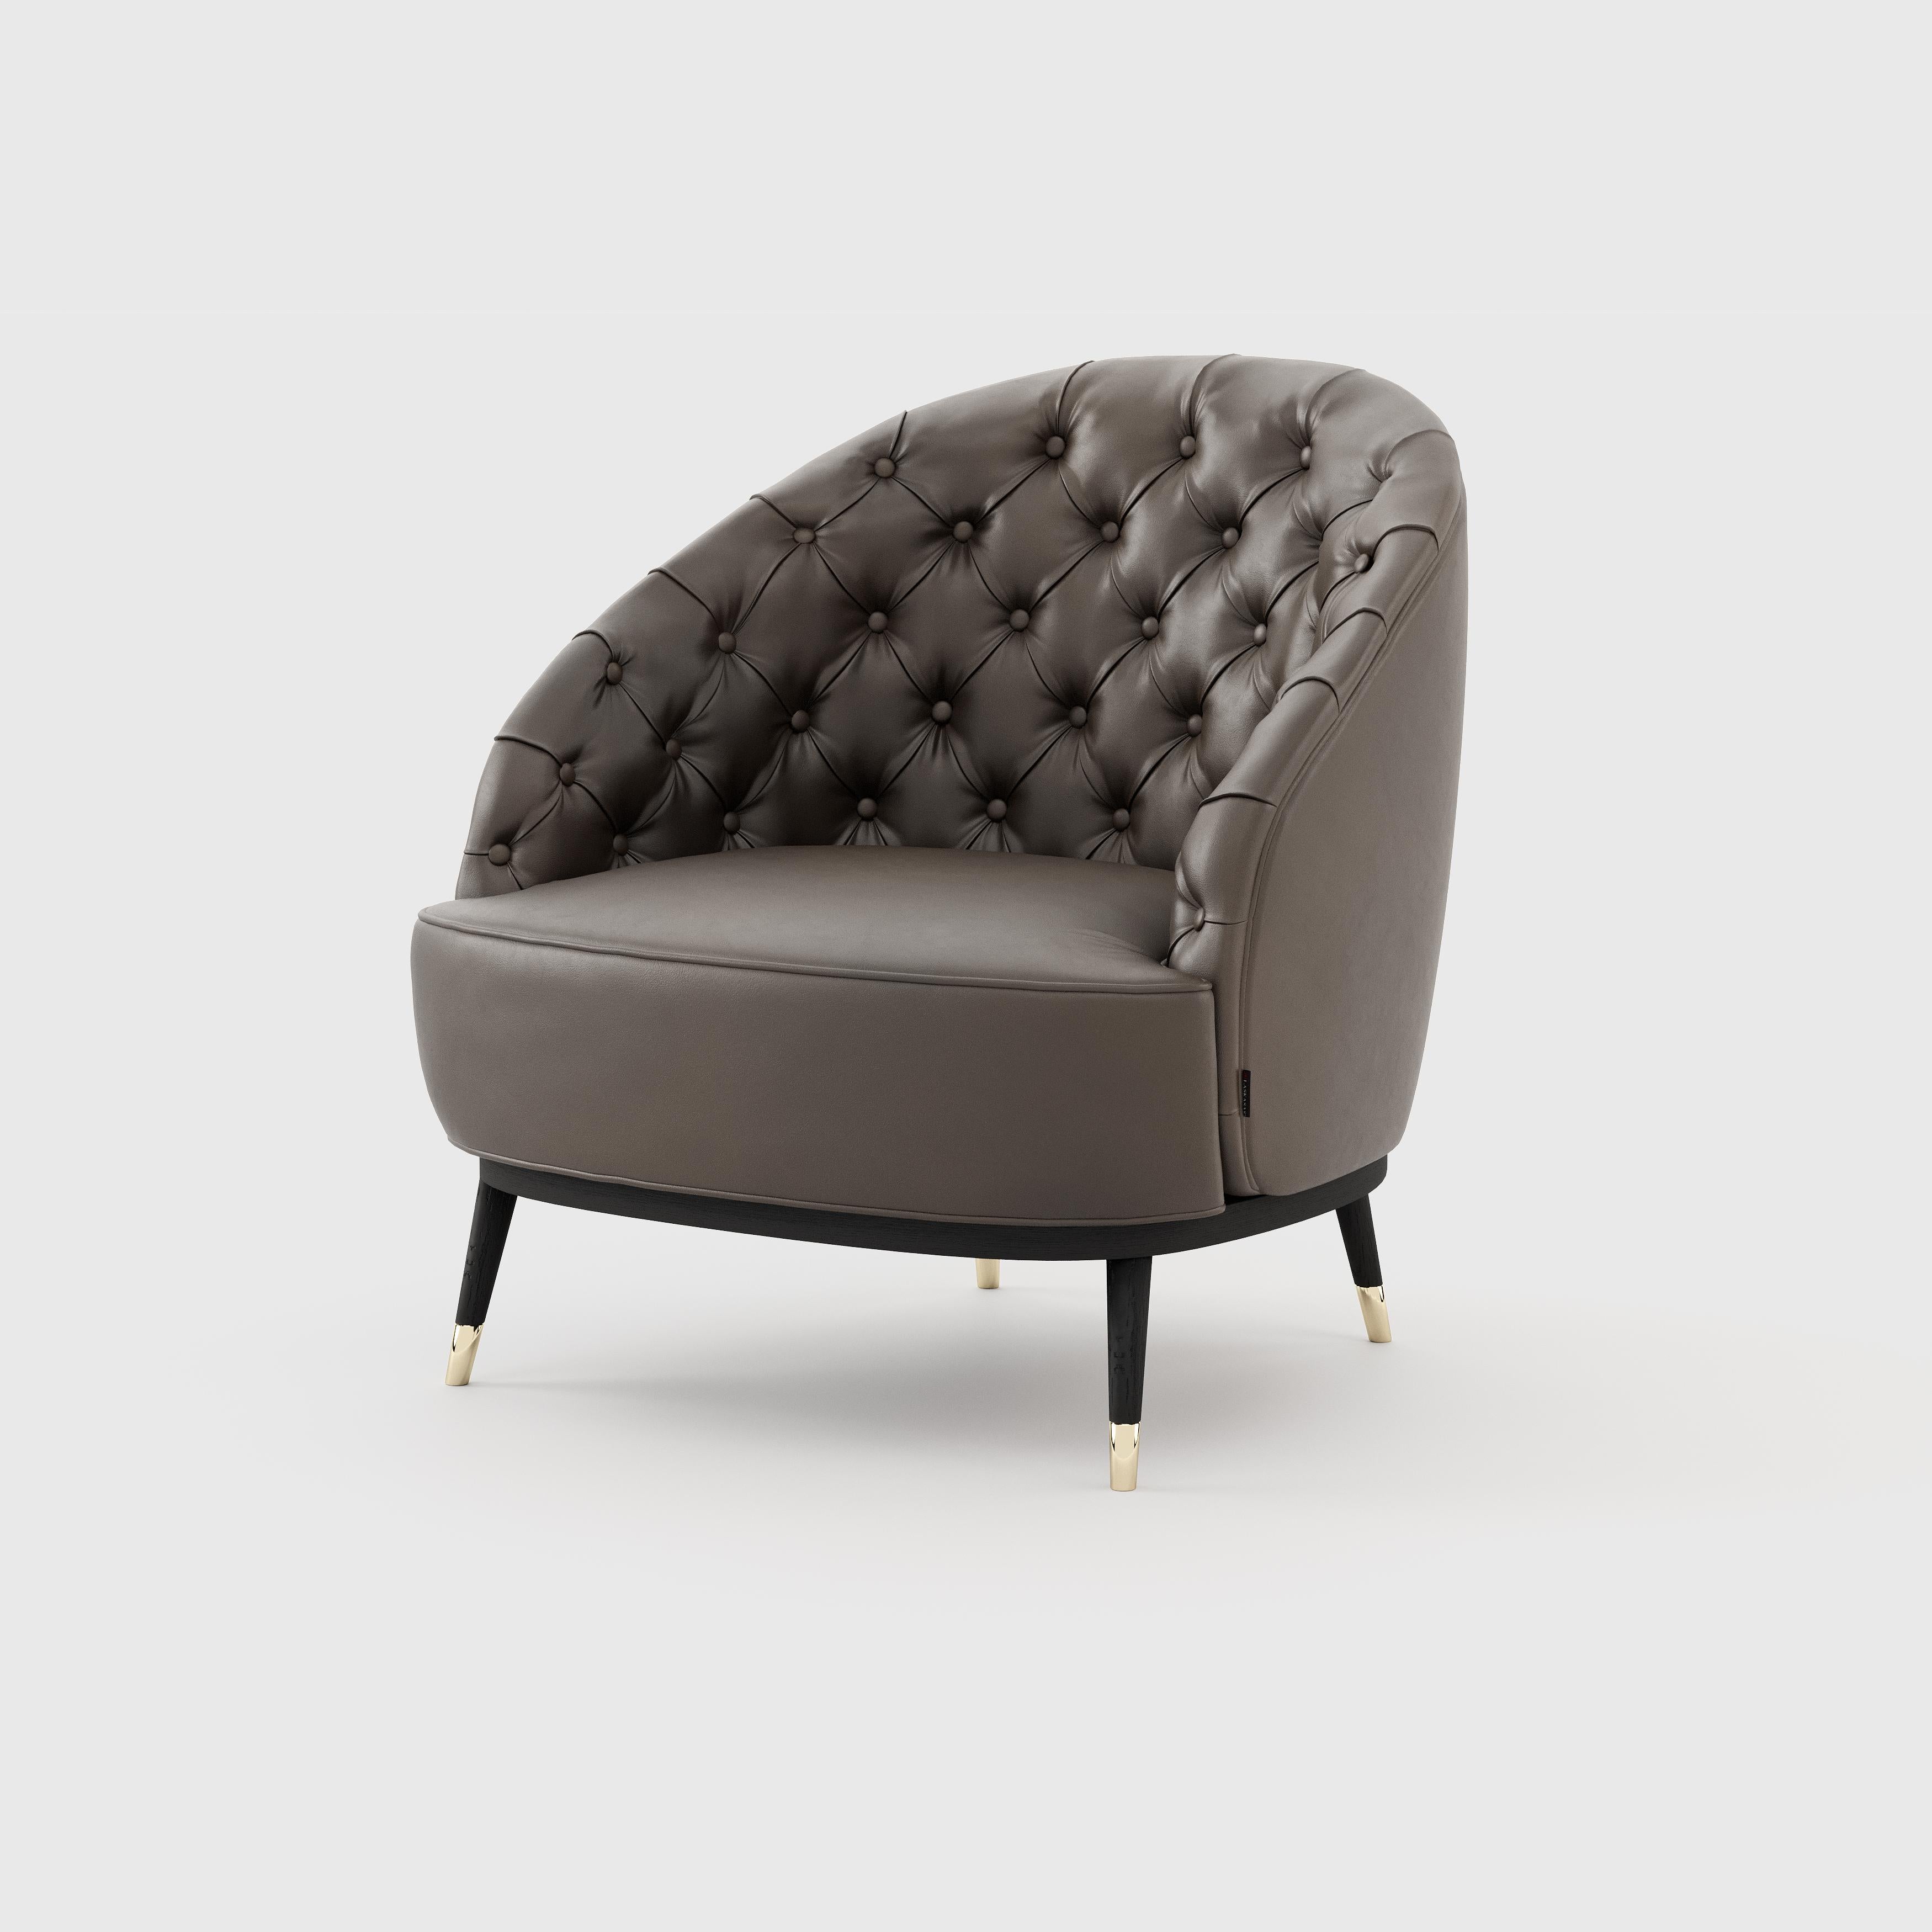 Hector armchair features a solid body structure combined with organic elements and luxury velvet fabrics. The back designed with deep buttoning evokes a warm sophisticated look that contrasts with the metal shoes on hector chair legs.

* Available